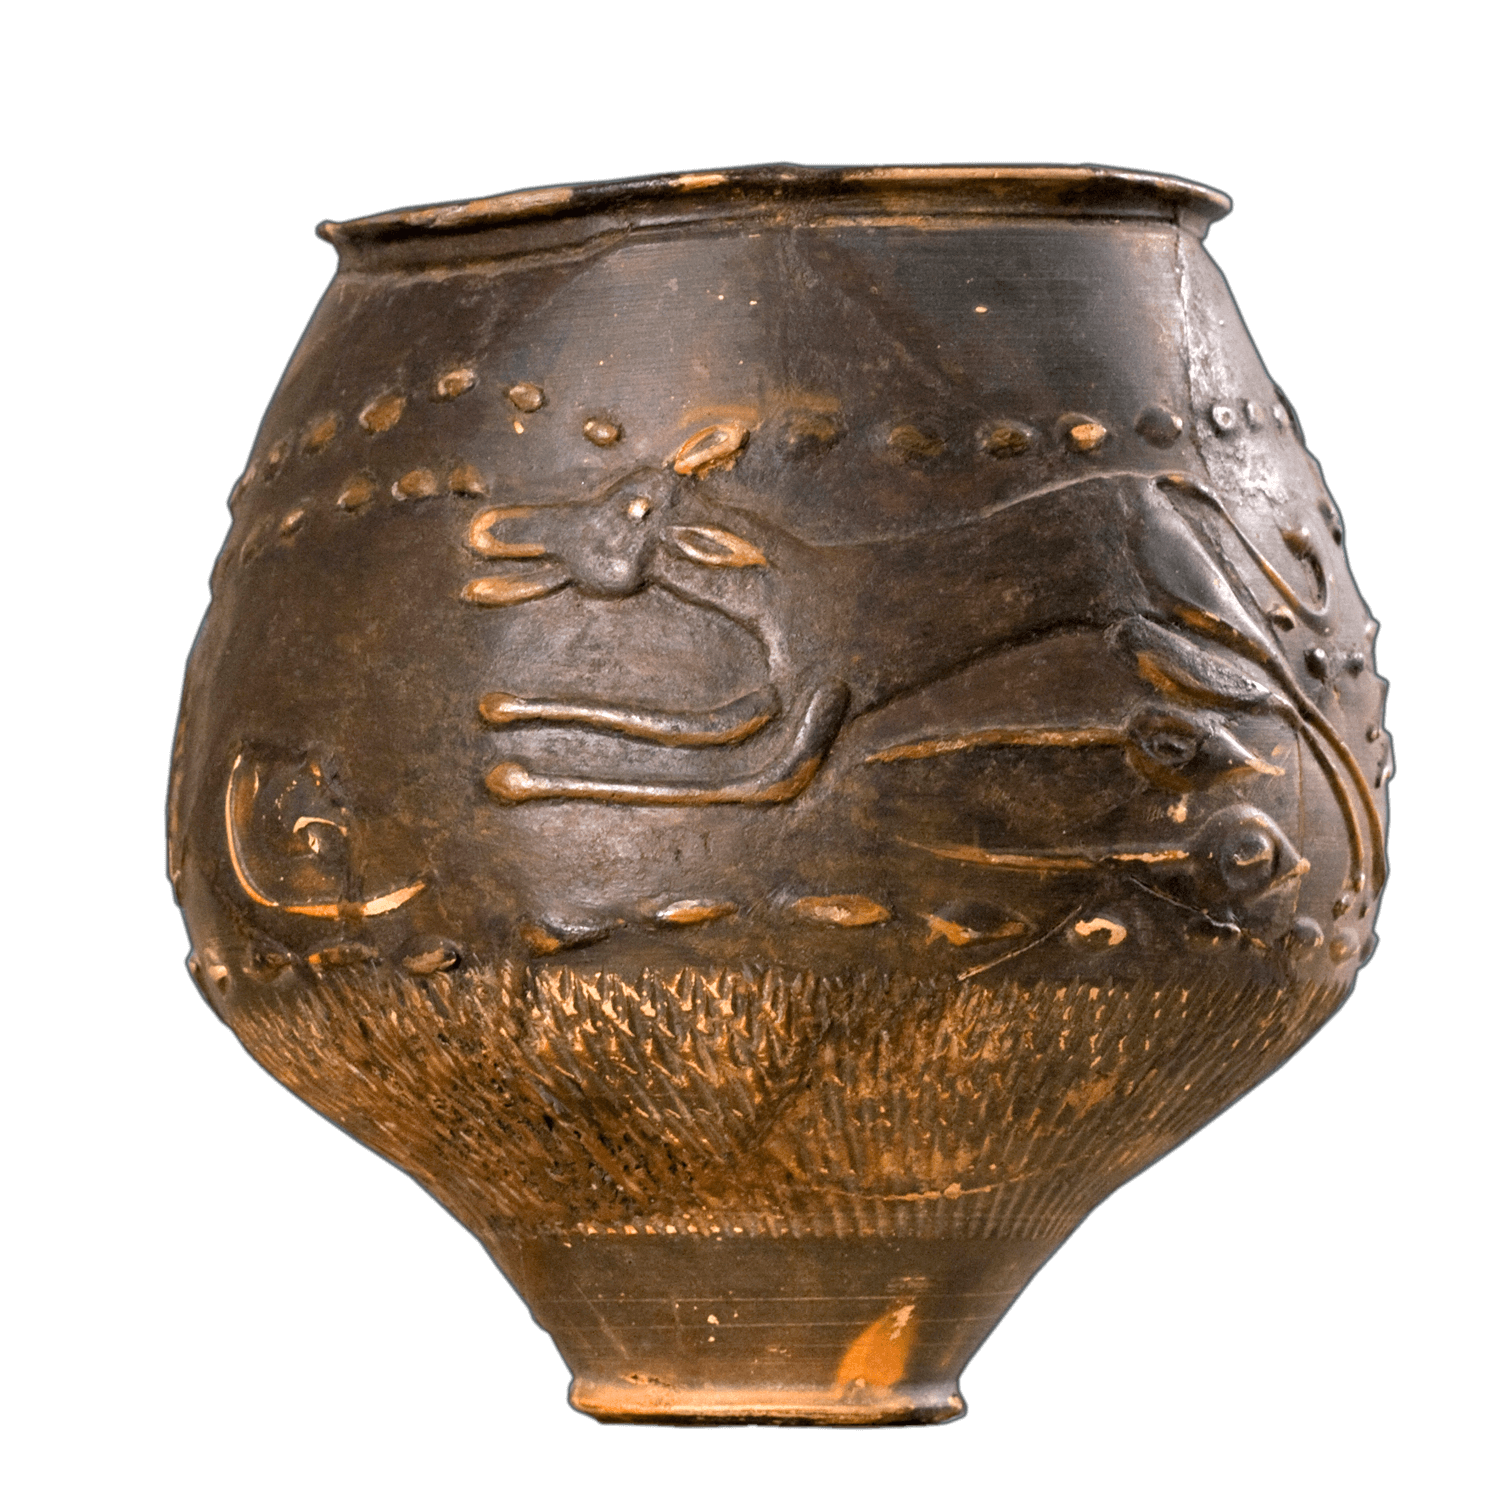 A dark ceramic cup with a narrow bottom. On the side is a dog running.